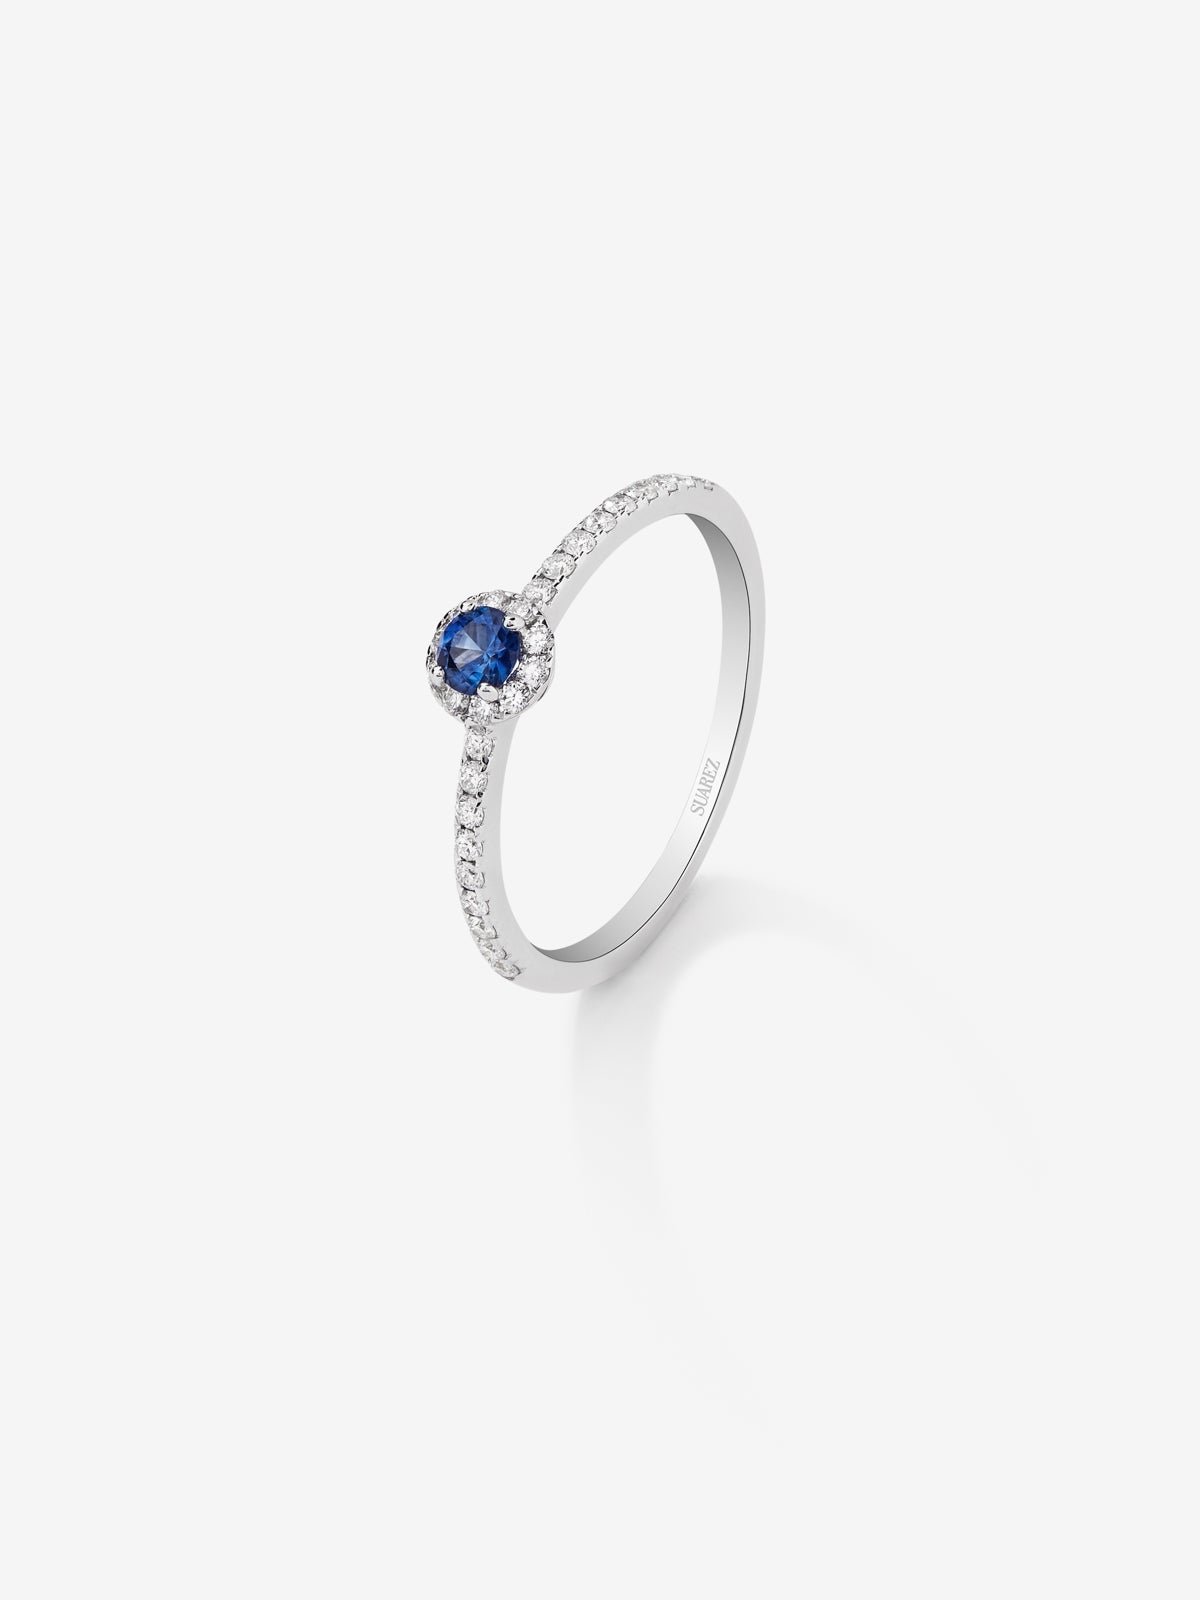 18K white gold ring with brilliant-cut blue sapphire of 0.15 cts and border and arm of 28 brilliant-cut diamonds with a total of 0.2 cts